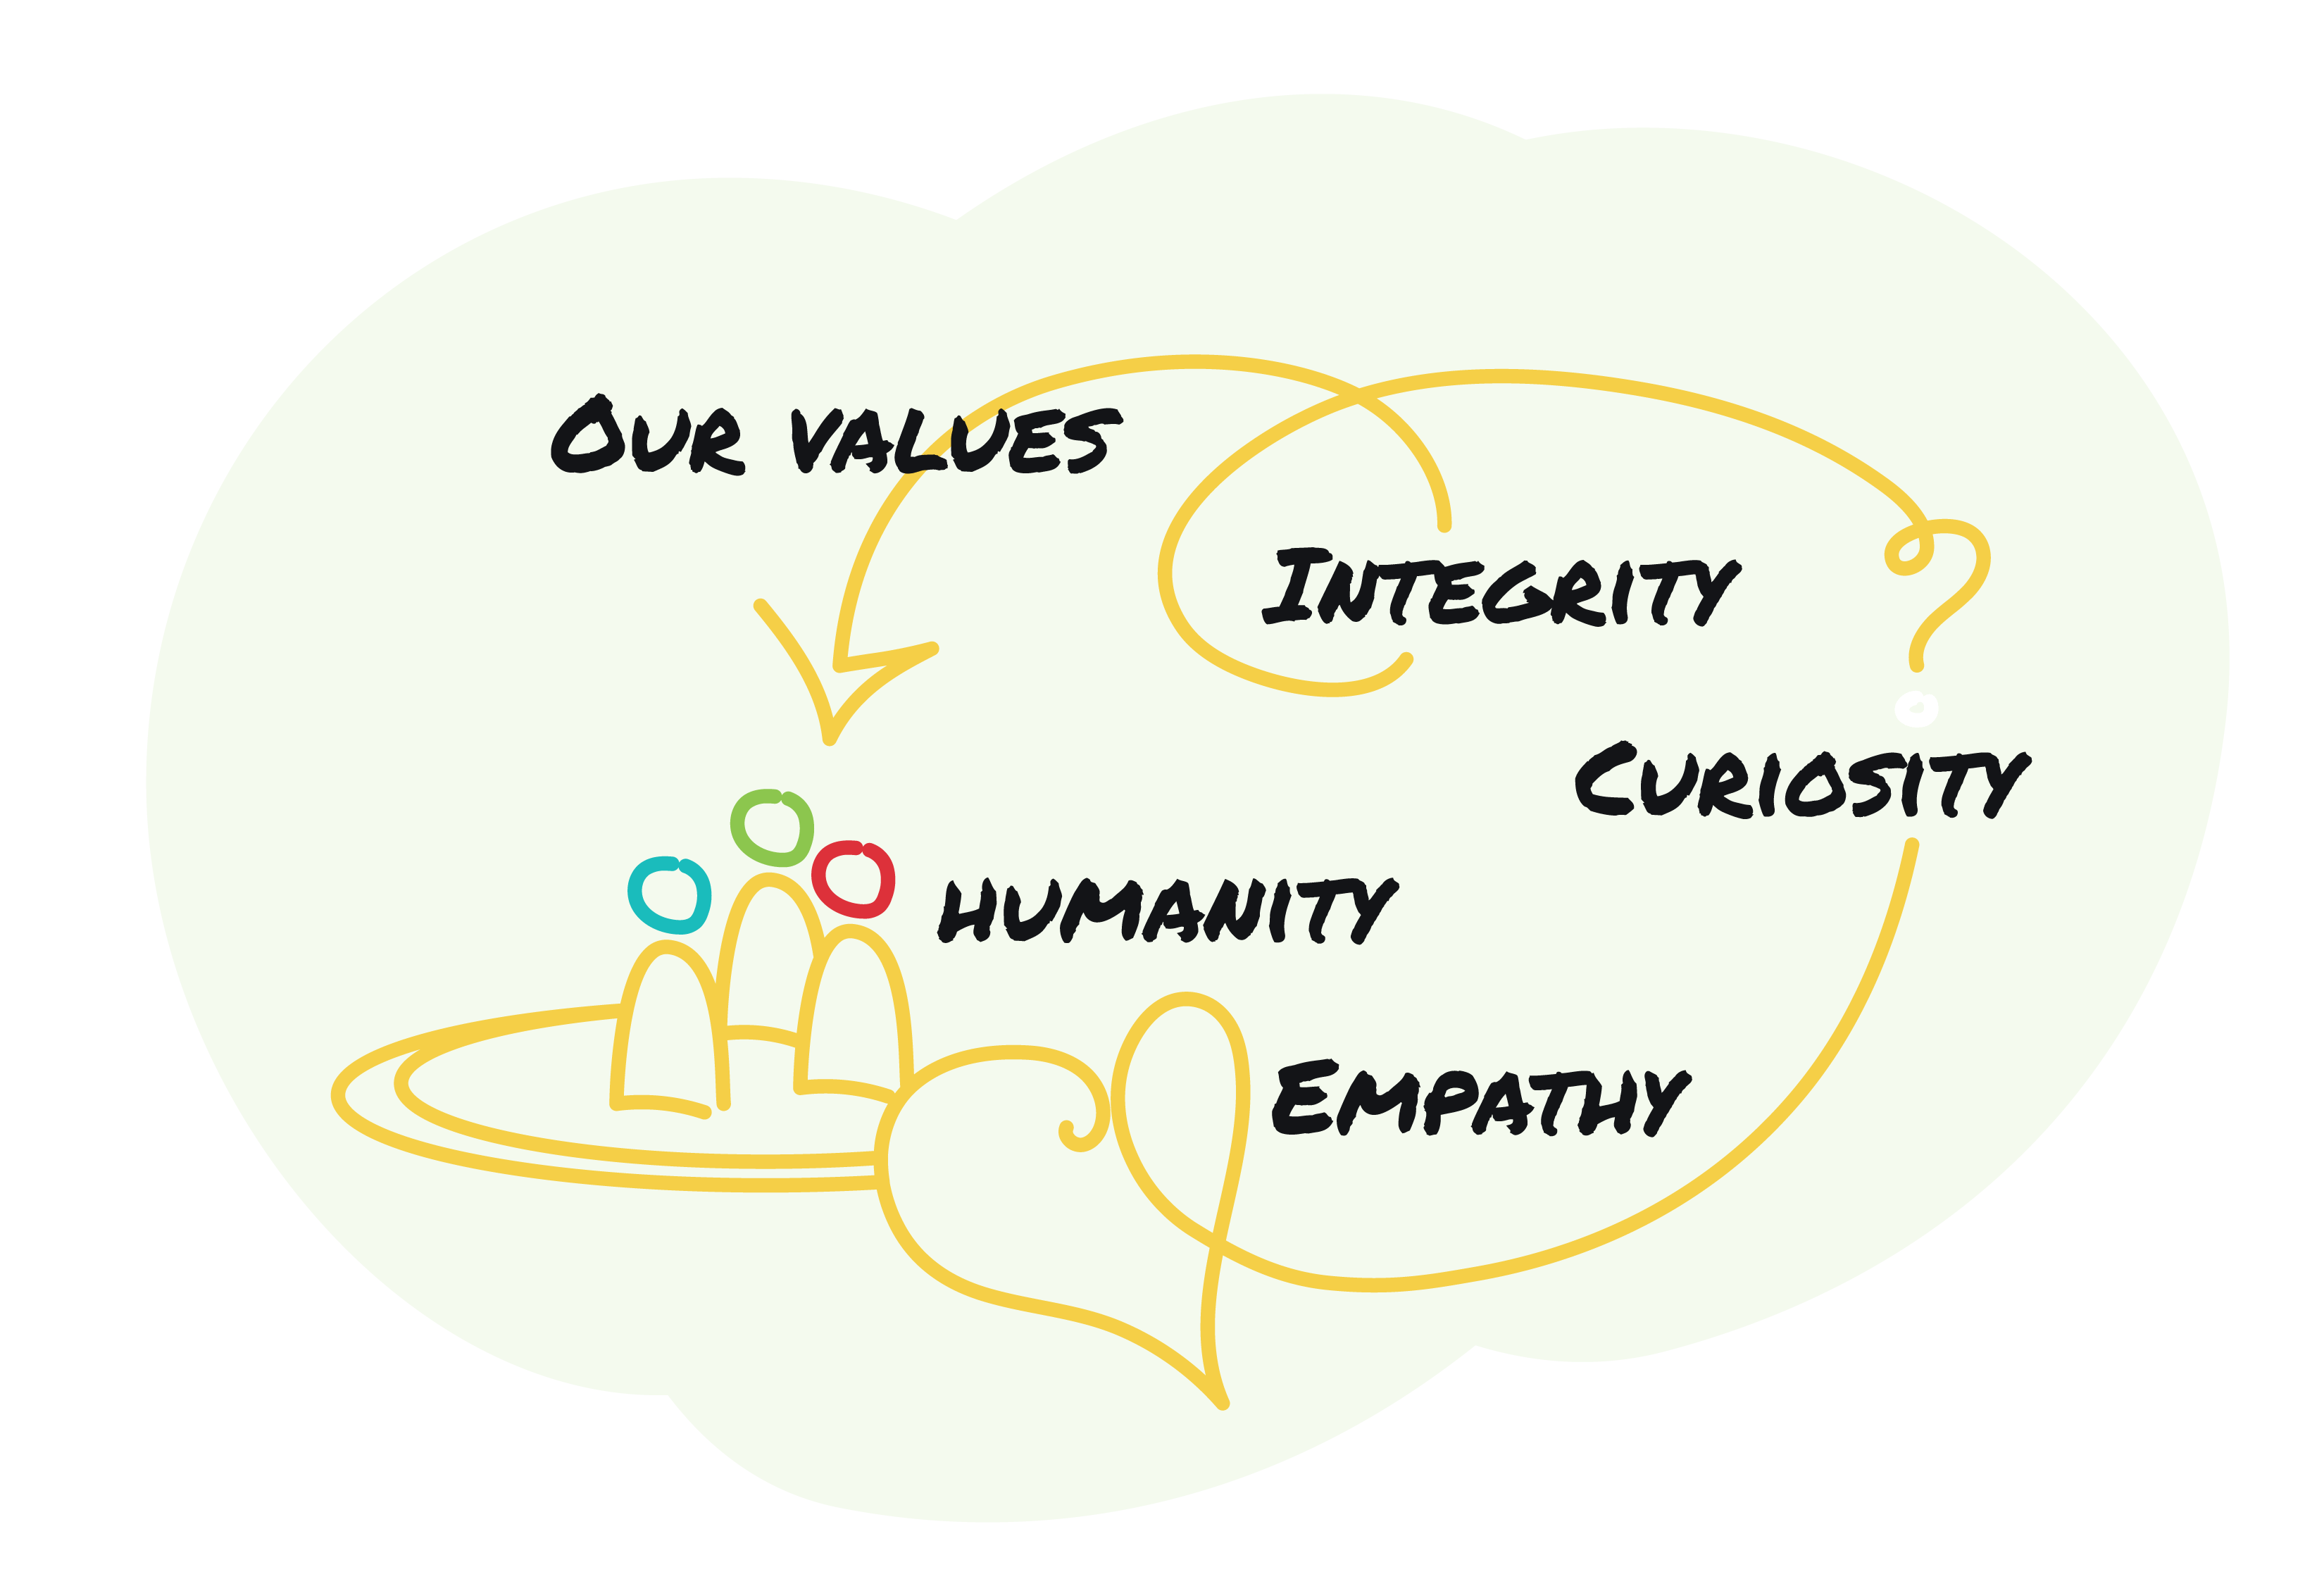 The Social Impact Lab values graphic